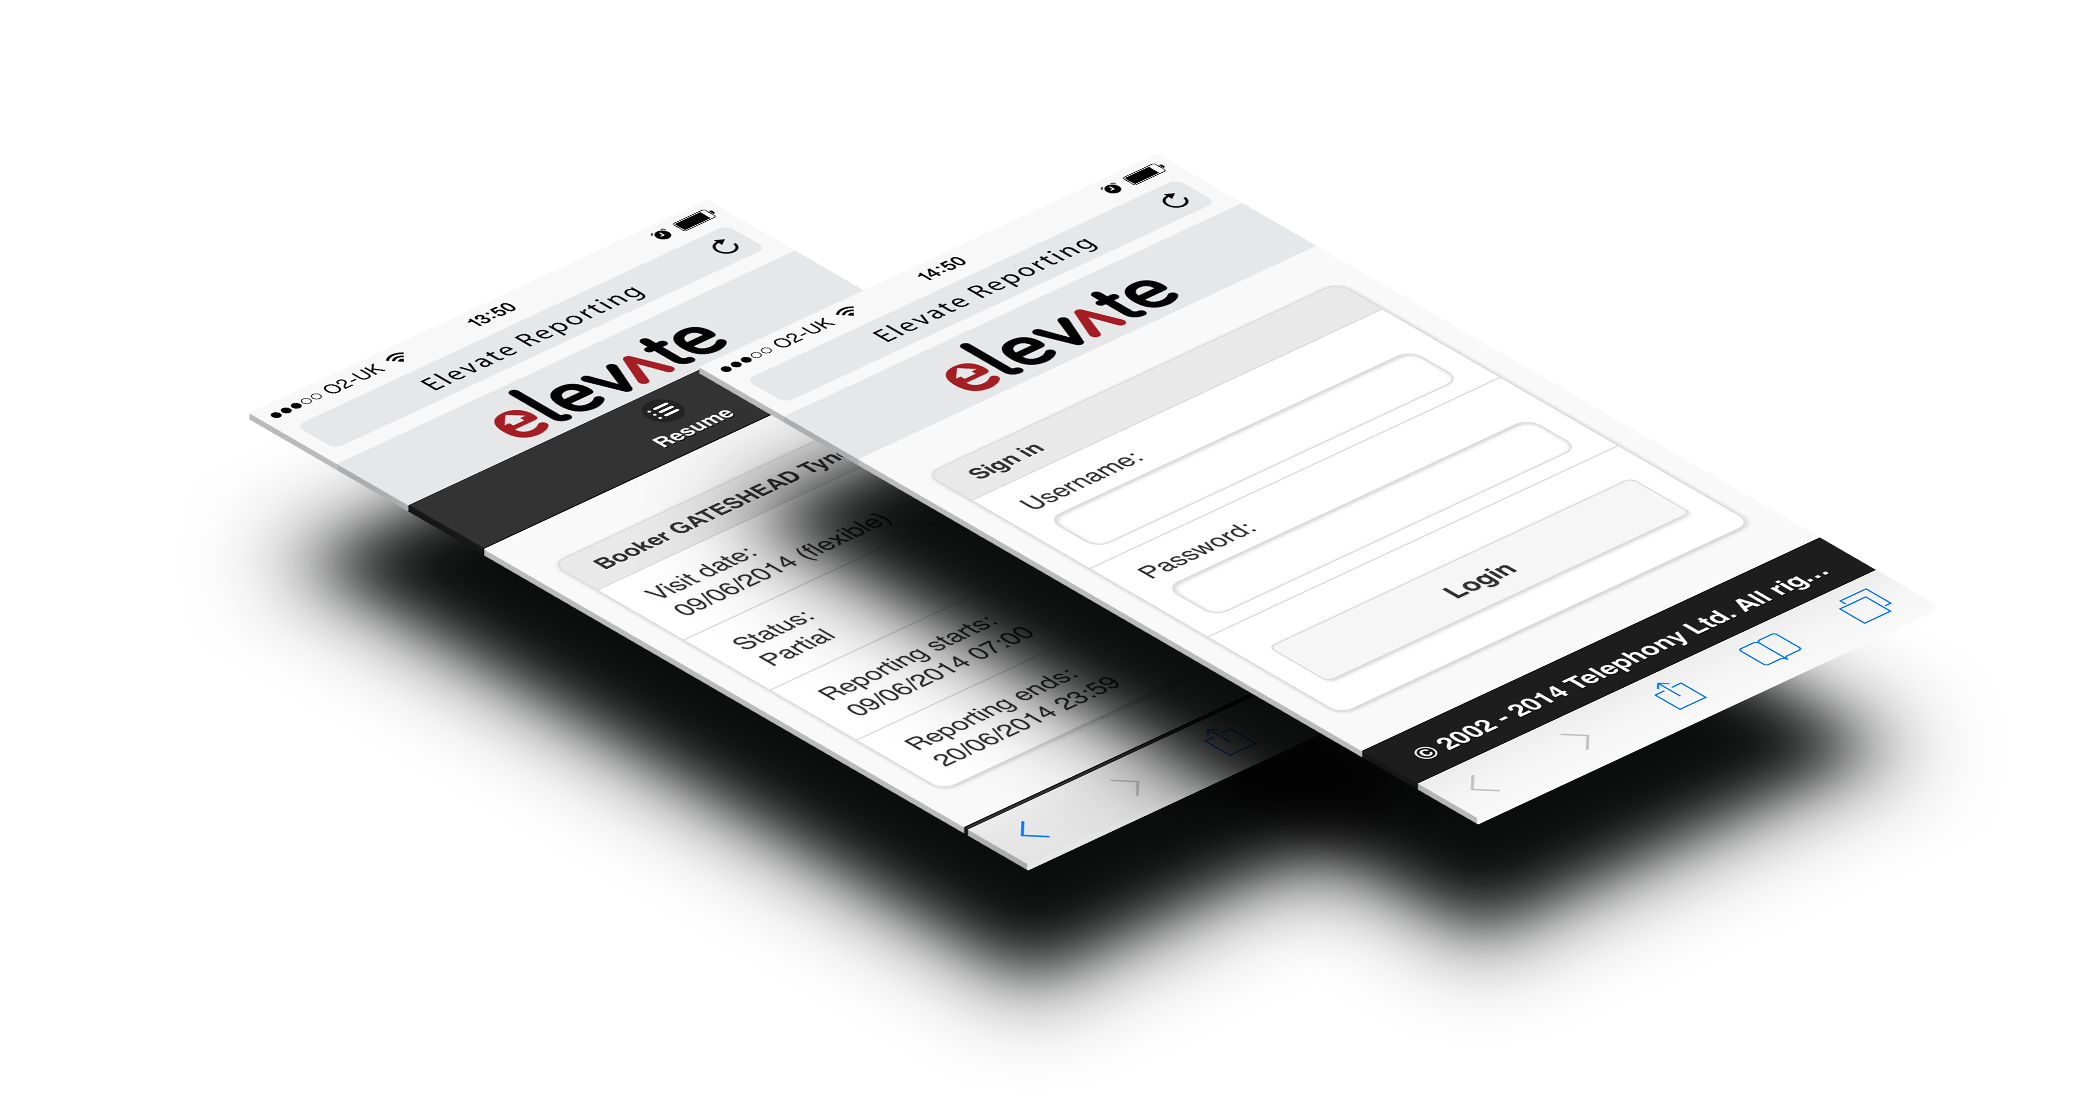 Elevate Mobile software